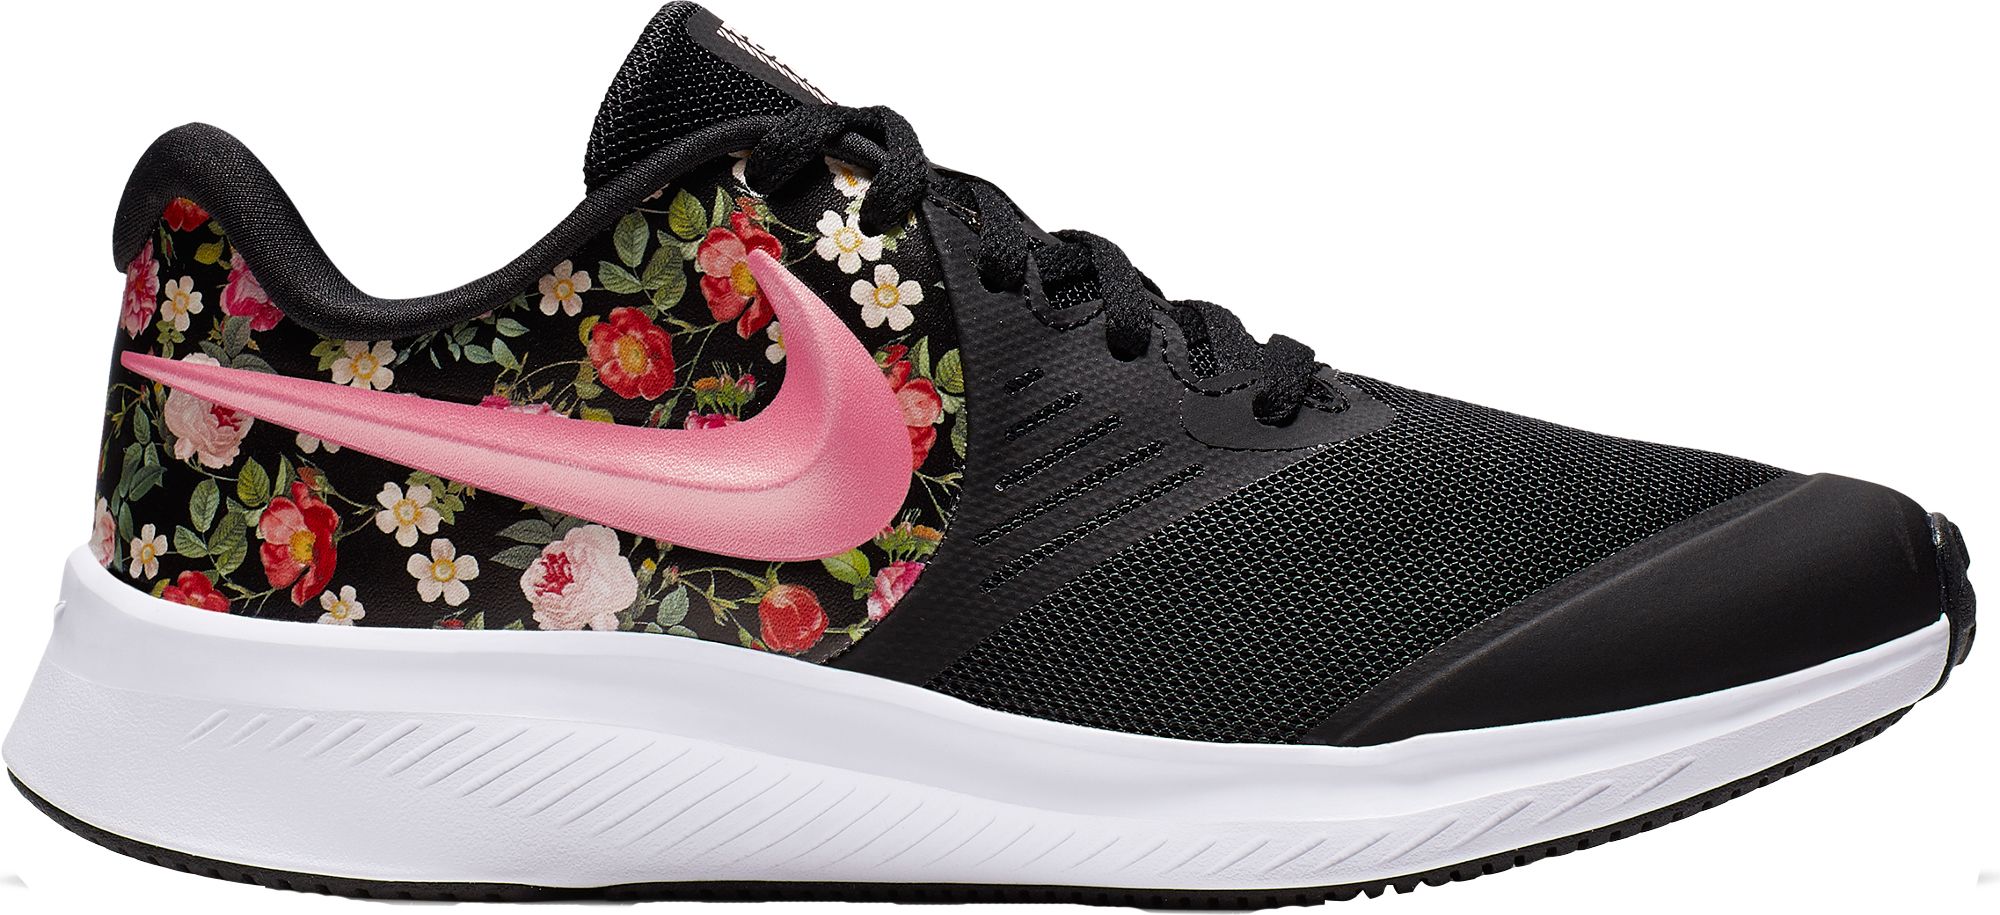 black nikes with flowers